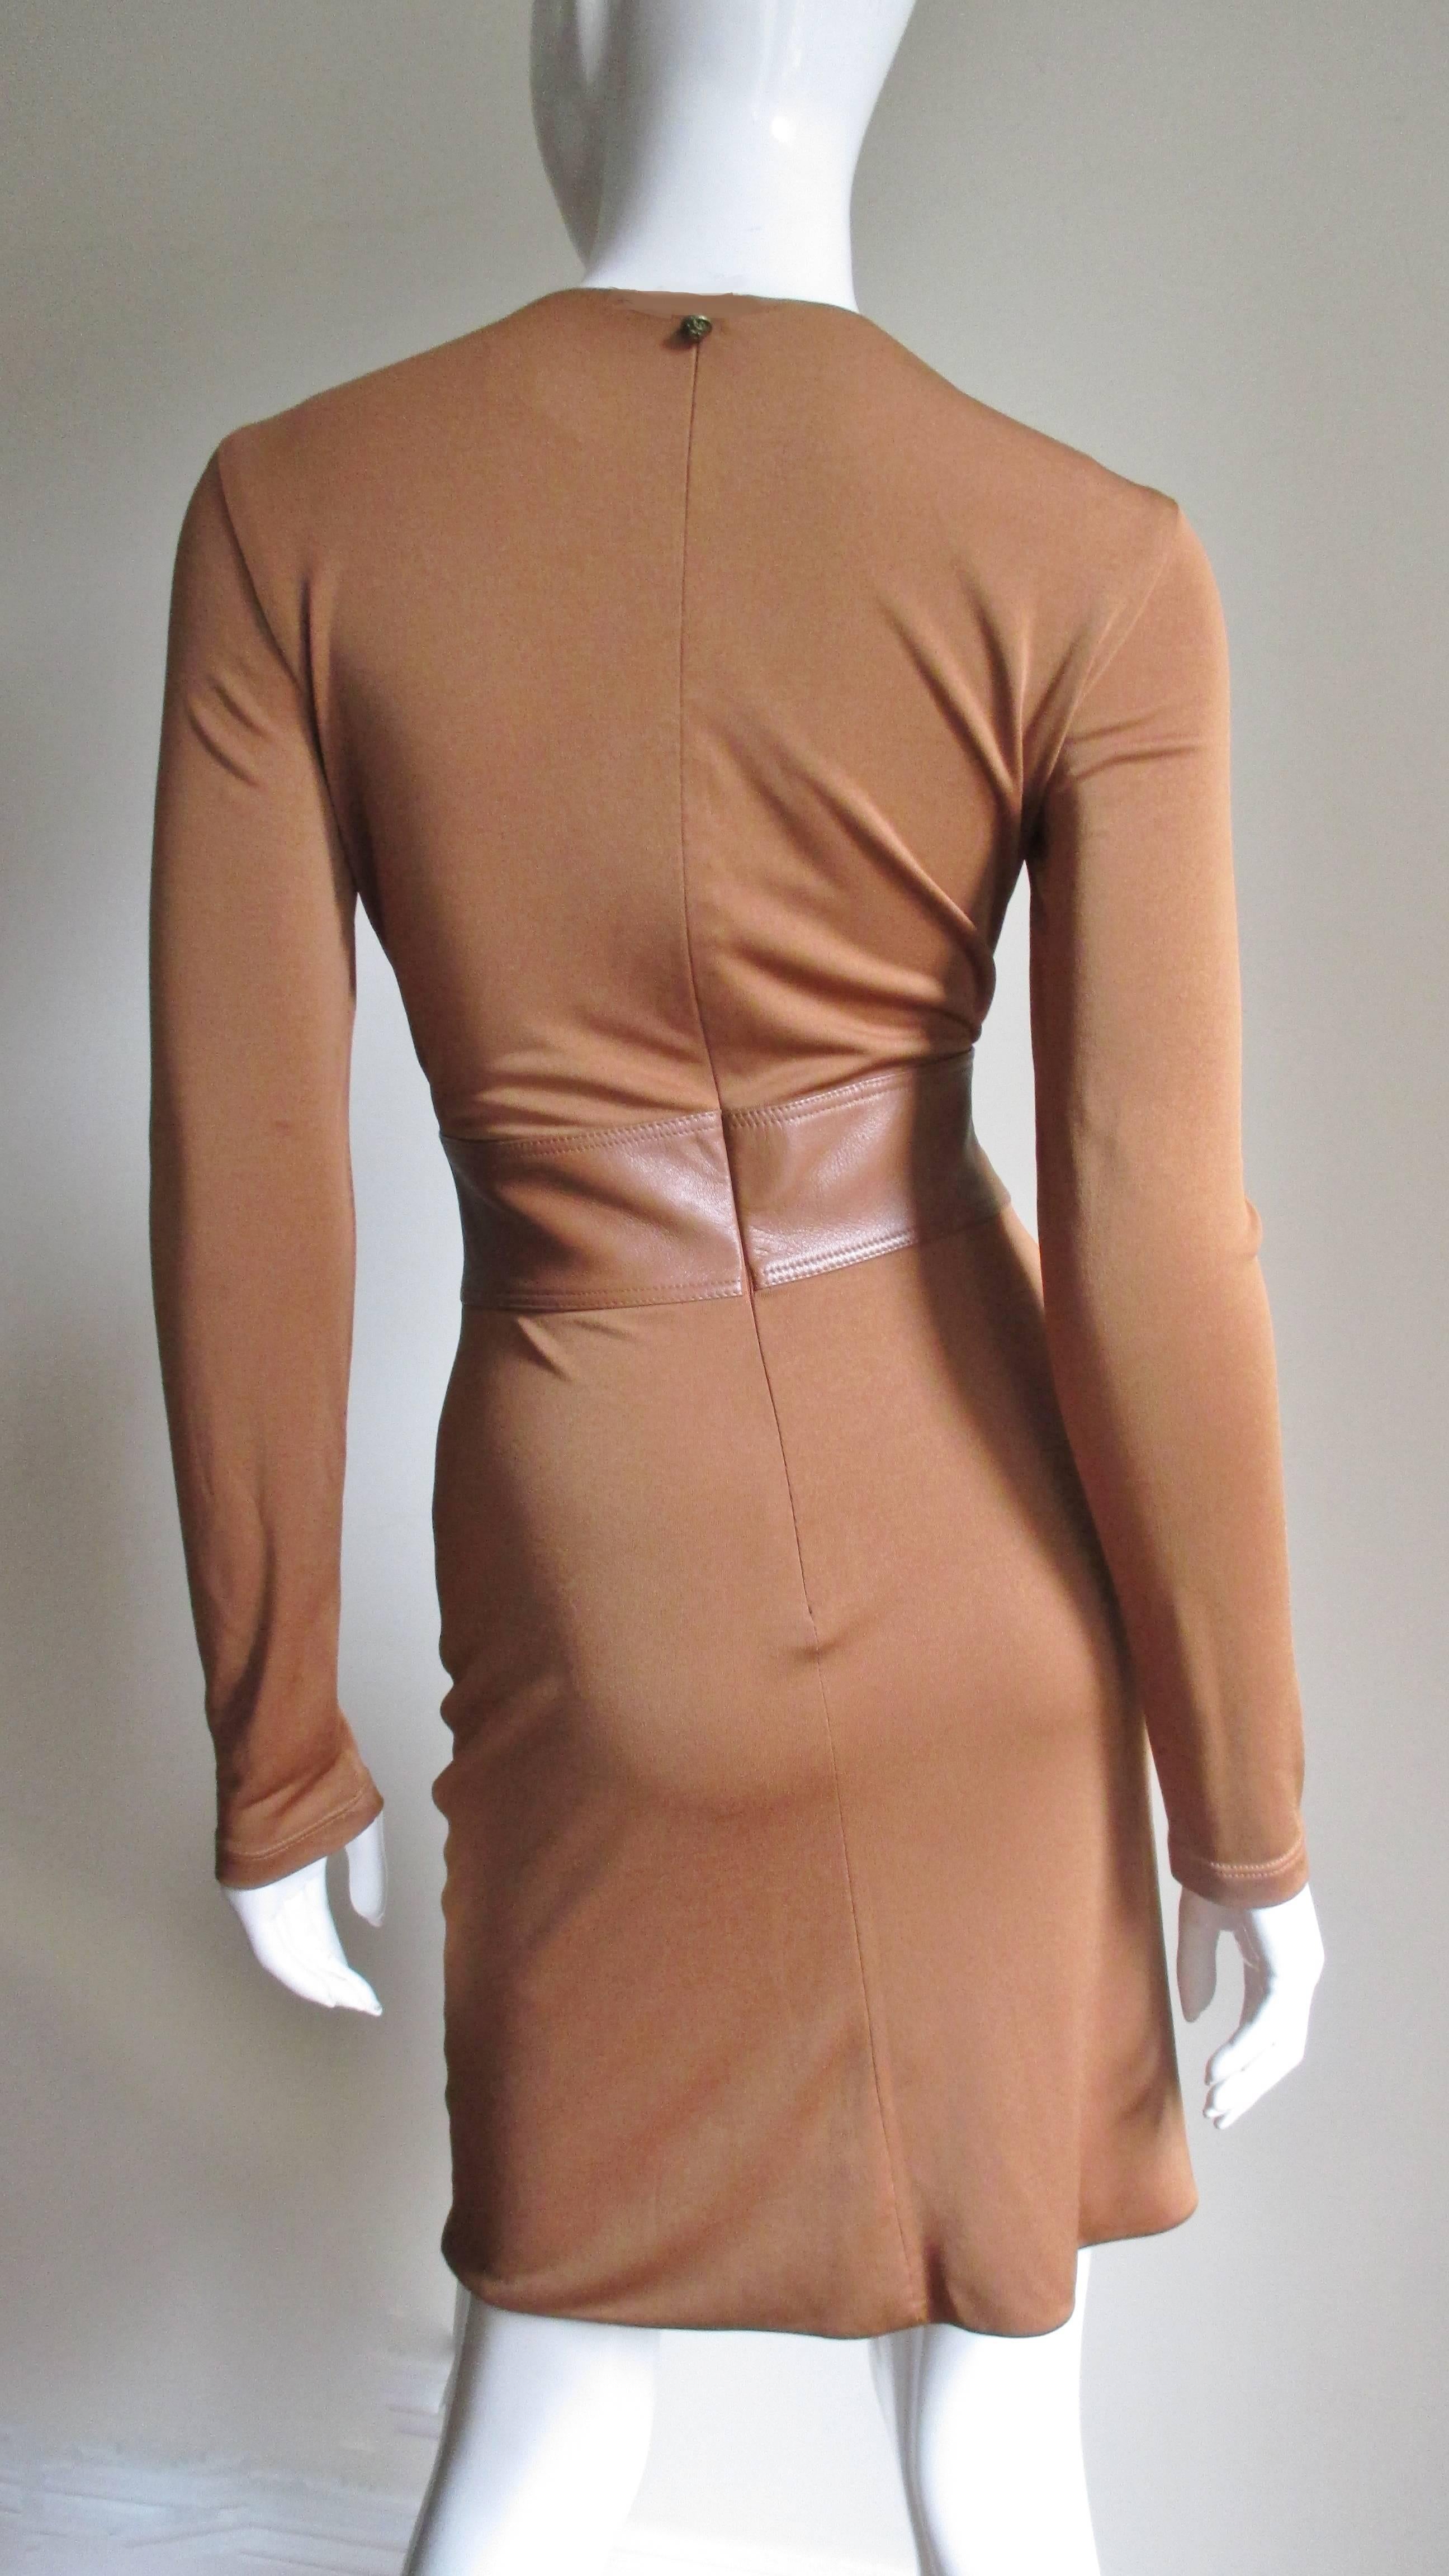 Women's Gianni Versace Silk Jersey Dress with Leather Waist A/W 2001 For Sale